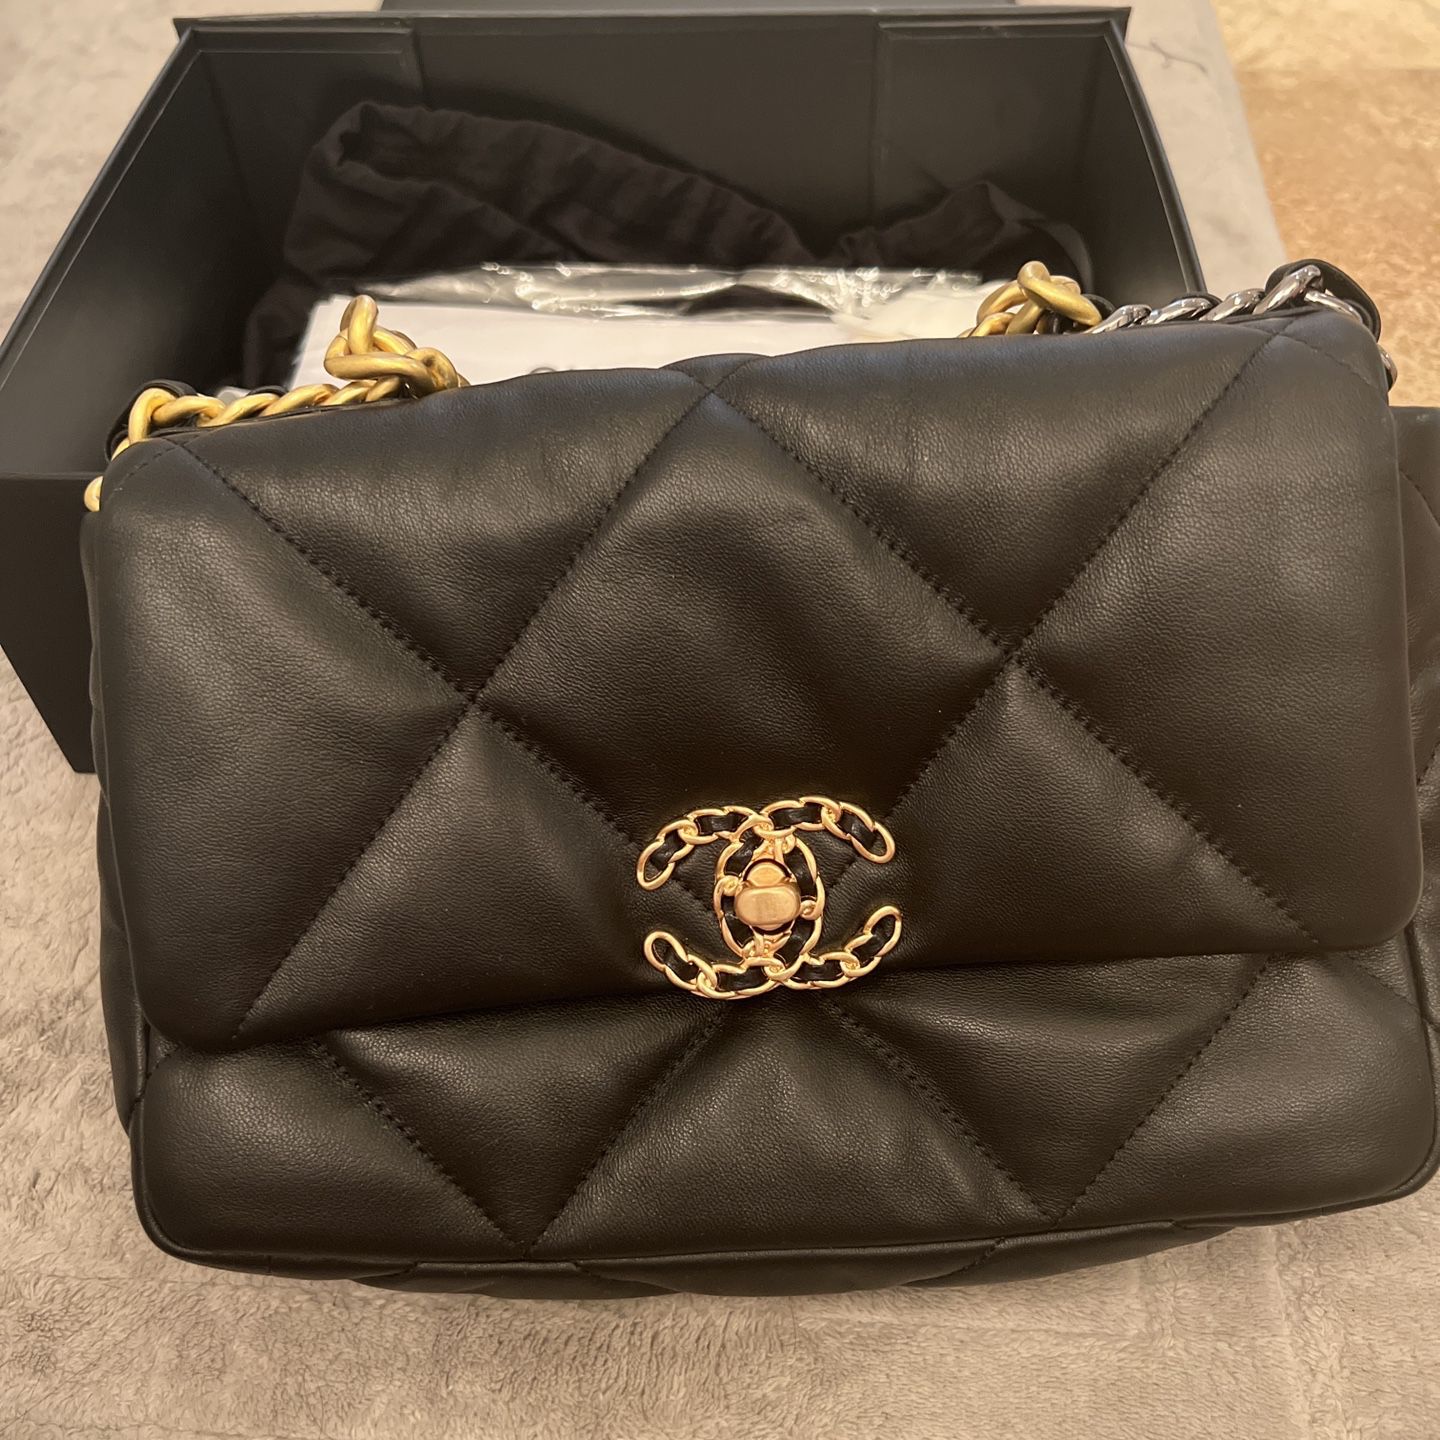 Chanel - Authenticated Chanel 19 Handbag - Leather Black for Women, Good Condition